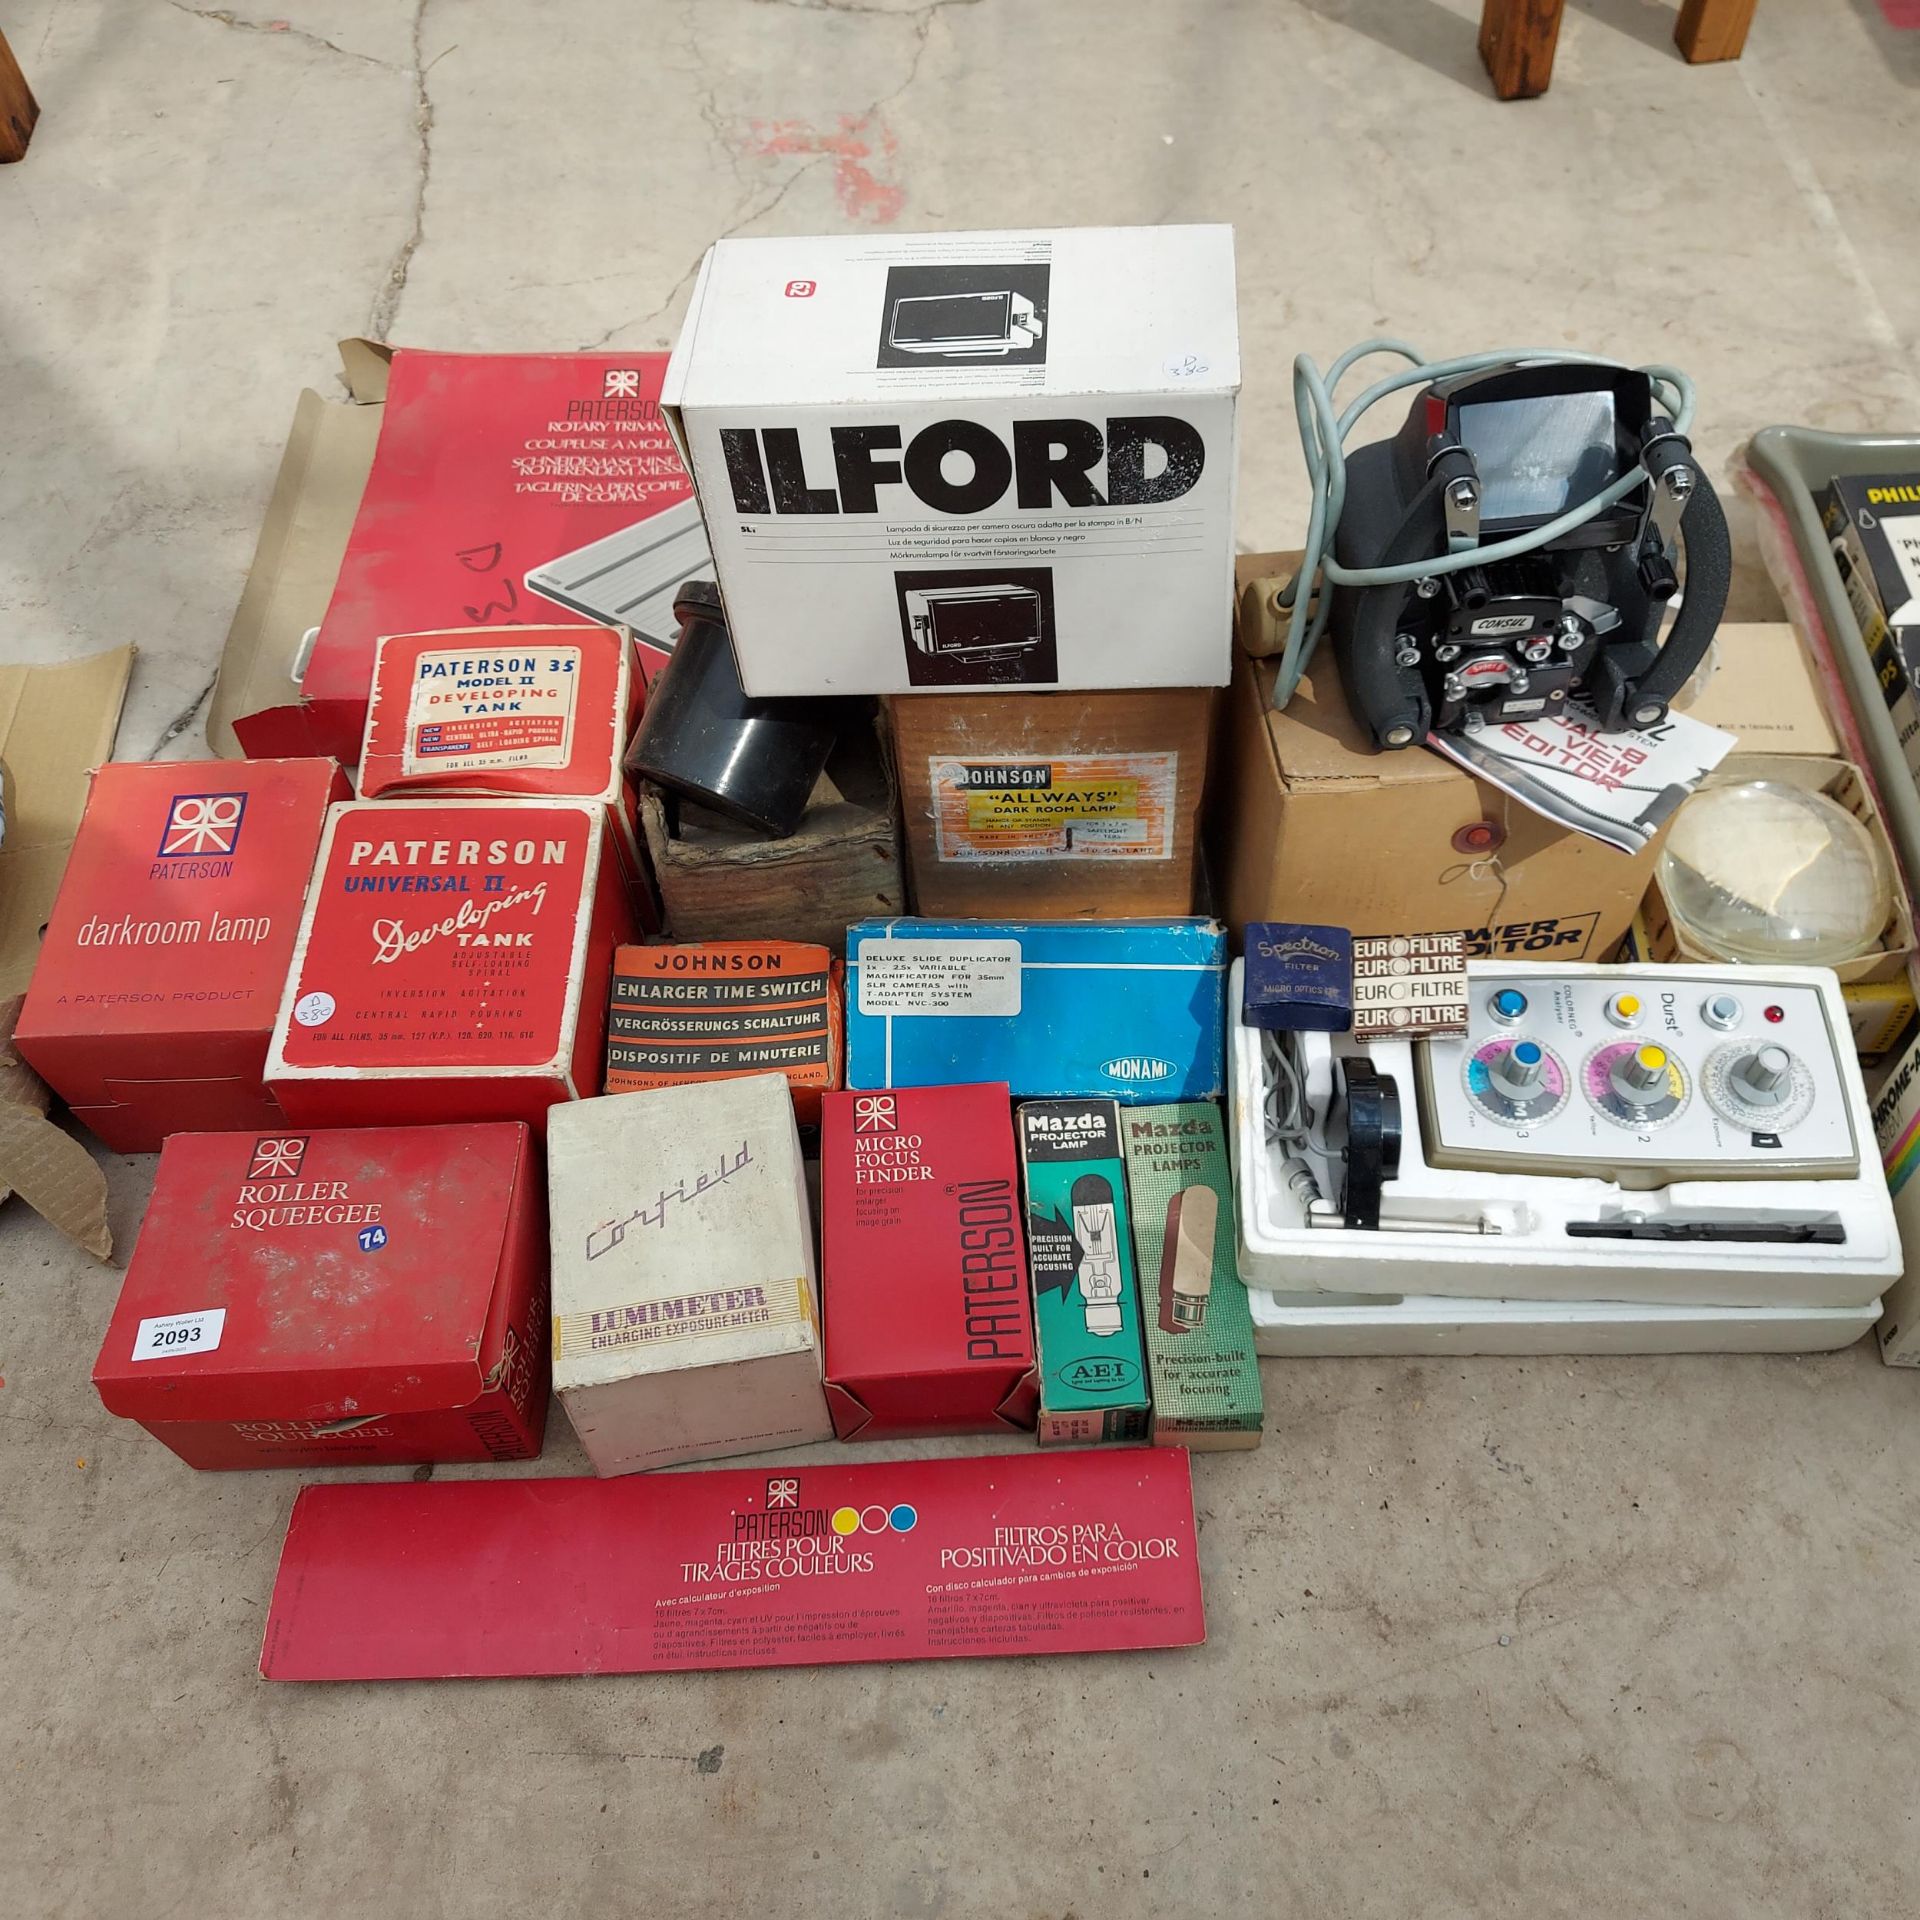 A LARGE ASSORTMENT OF PHOTOGRAPHY EQUIPMENT TO INCLUDE AN ILFORD PROCESSING DRUM, PROJECTORS ETC - Image 4 of 4